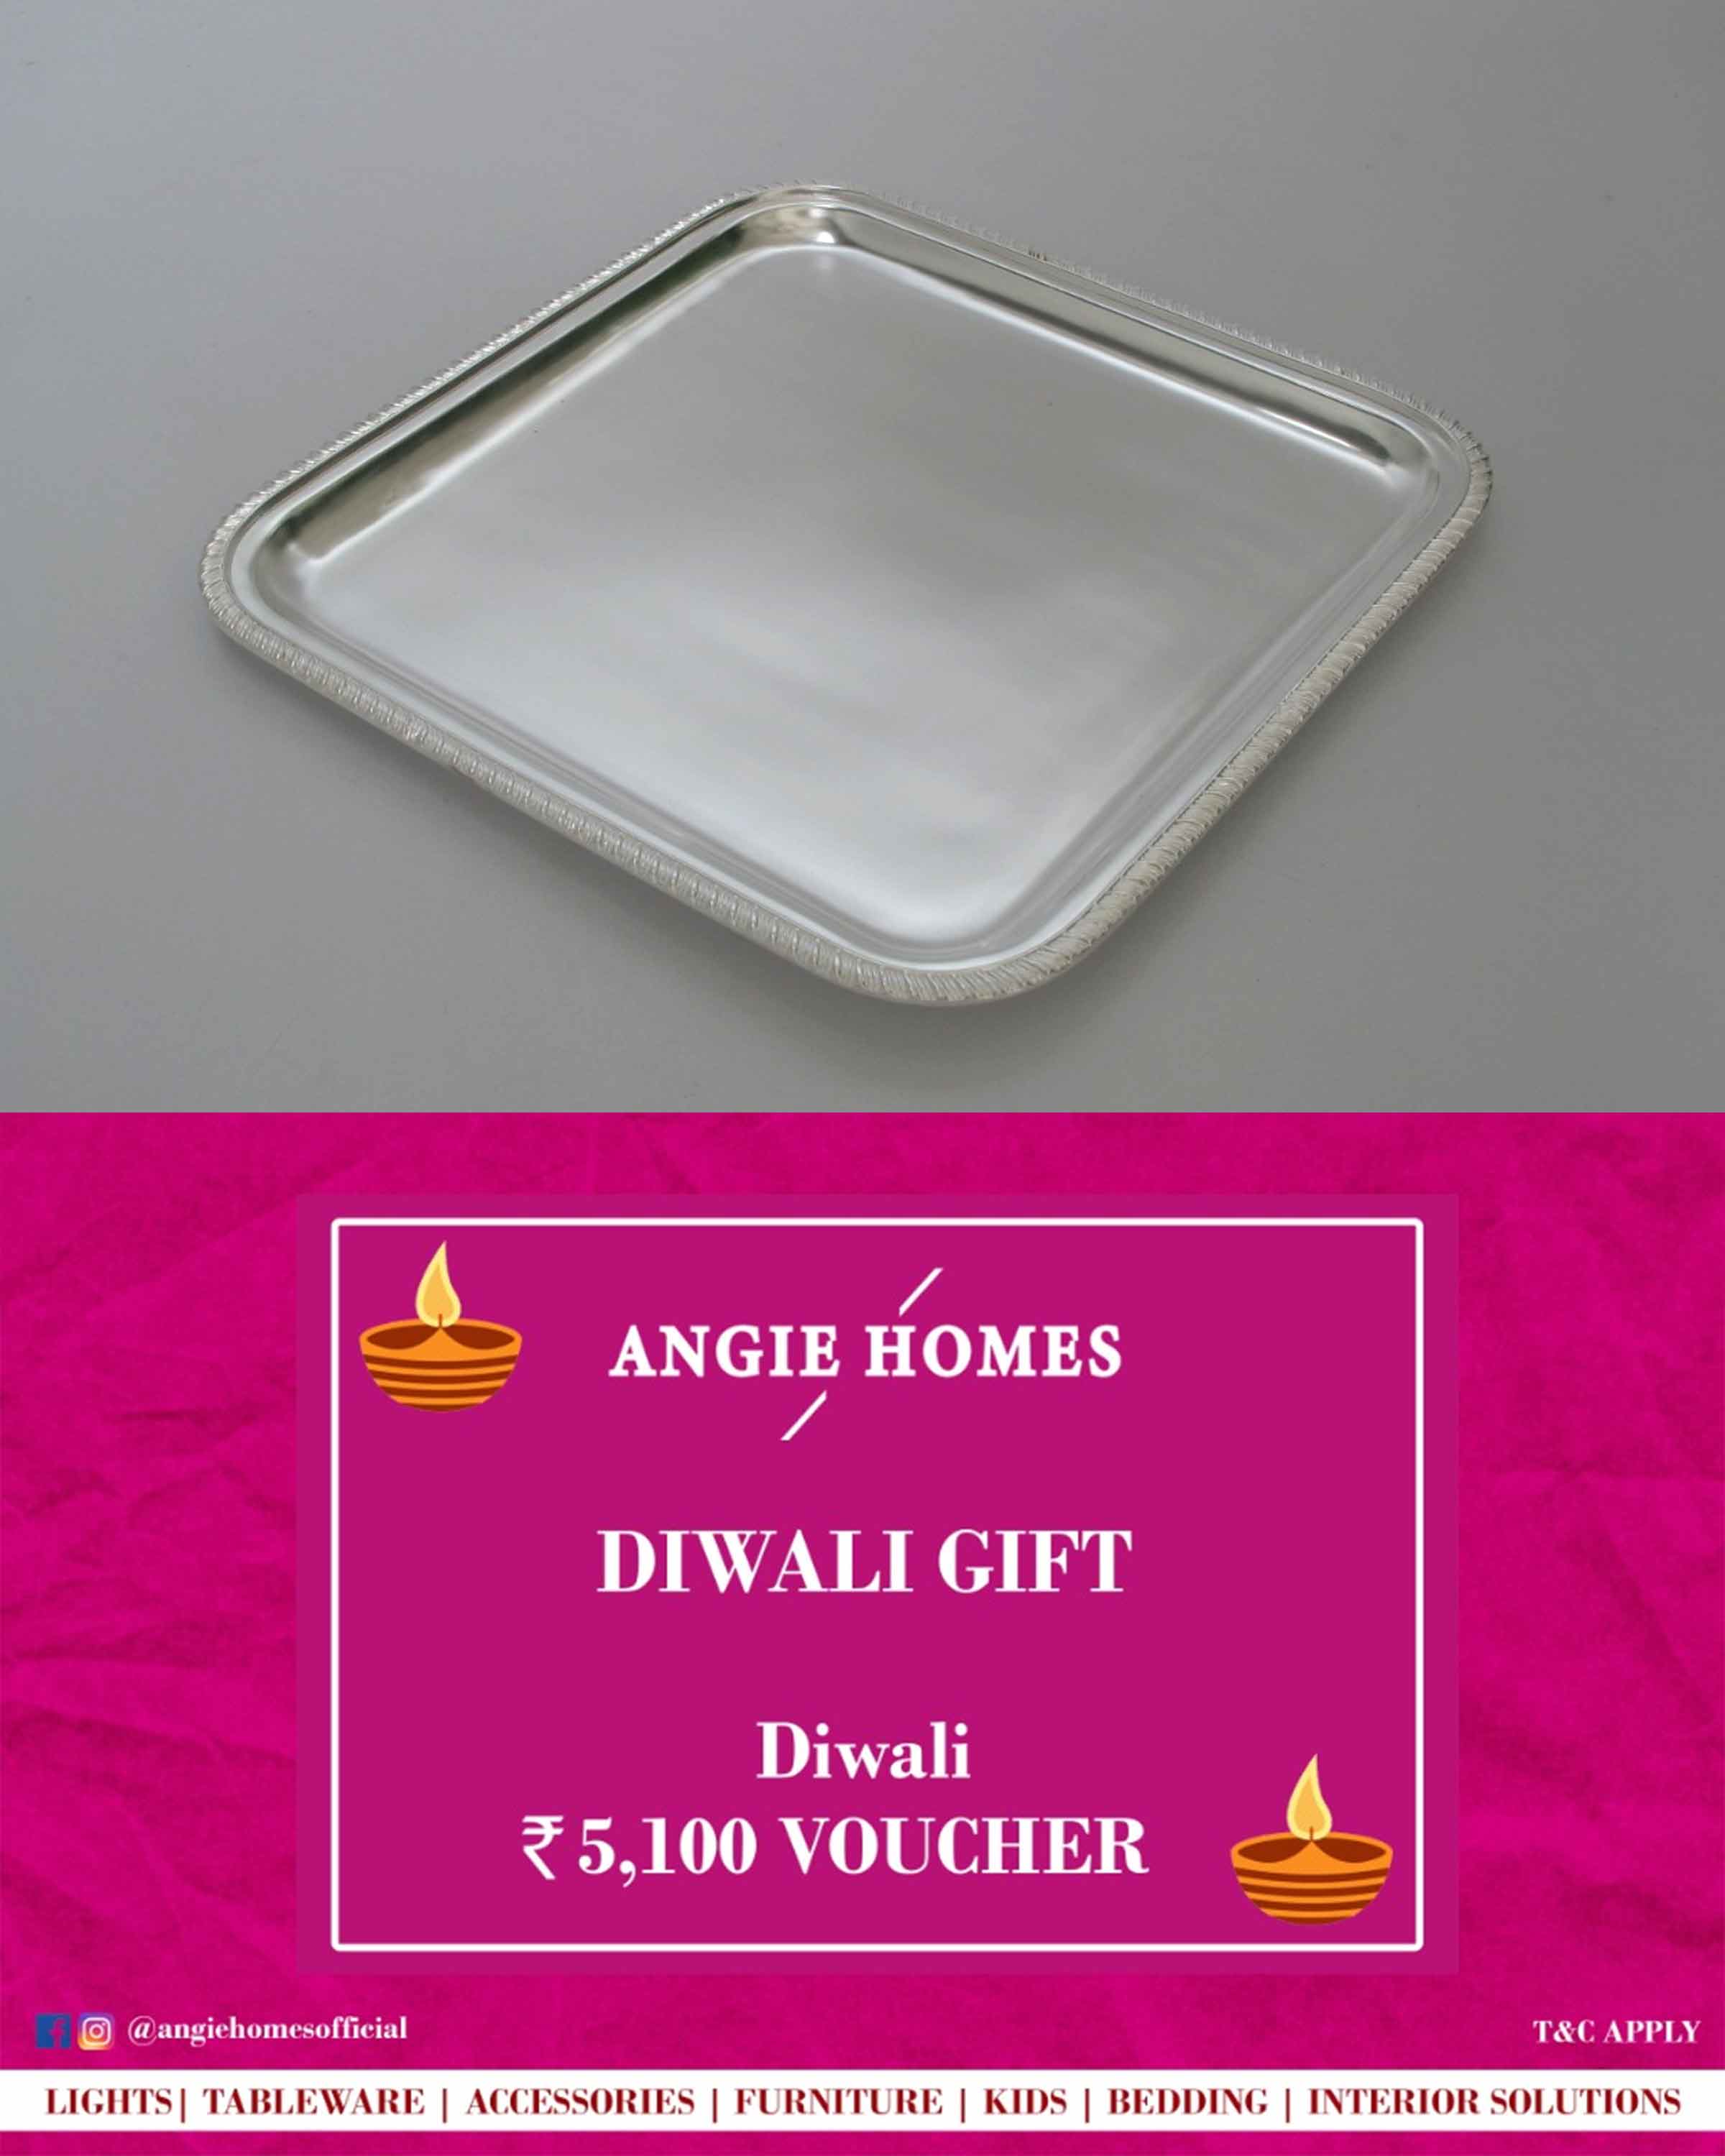 Online Diwali Gift Card Voucher for Square Silver Plated Tray | Silverware ANGIE HOMES